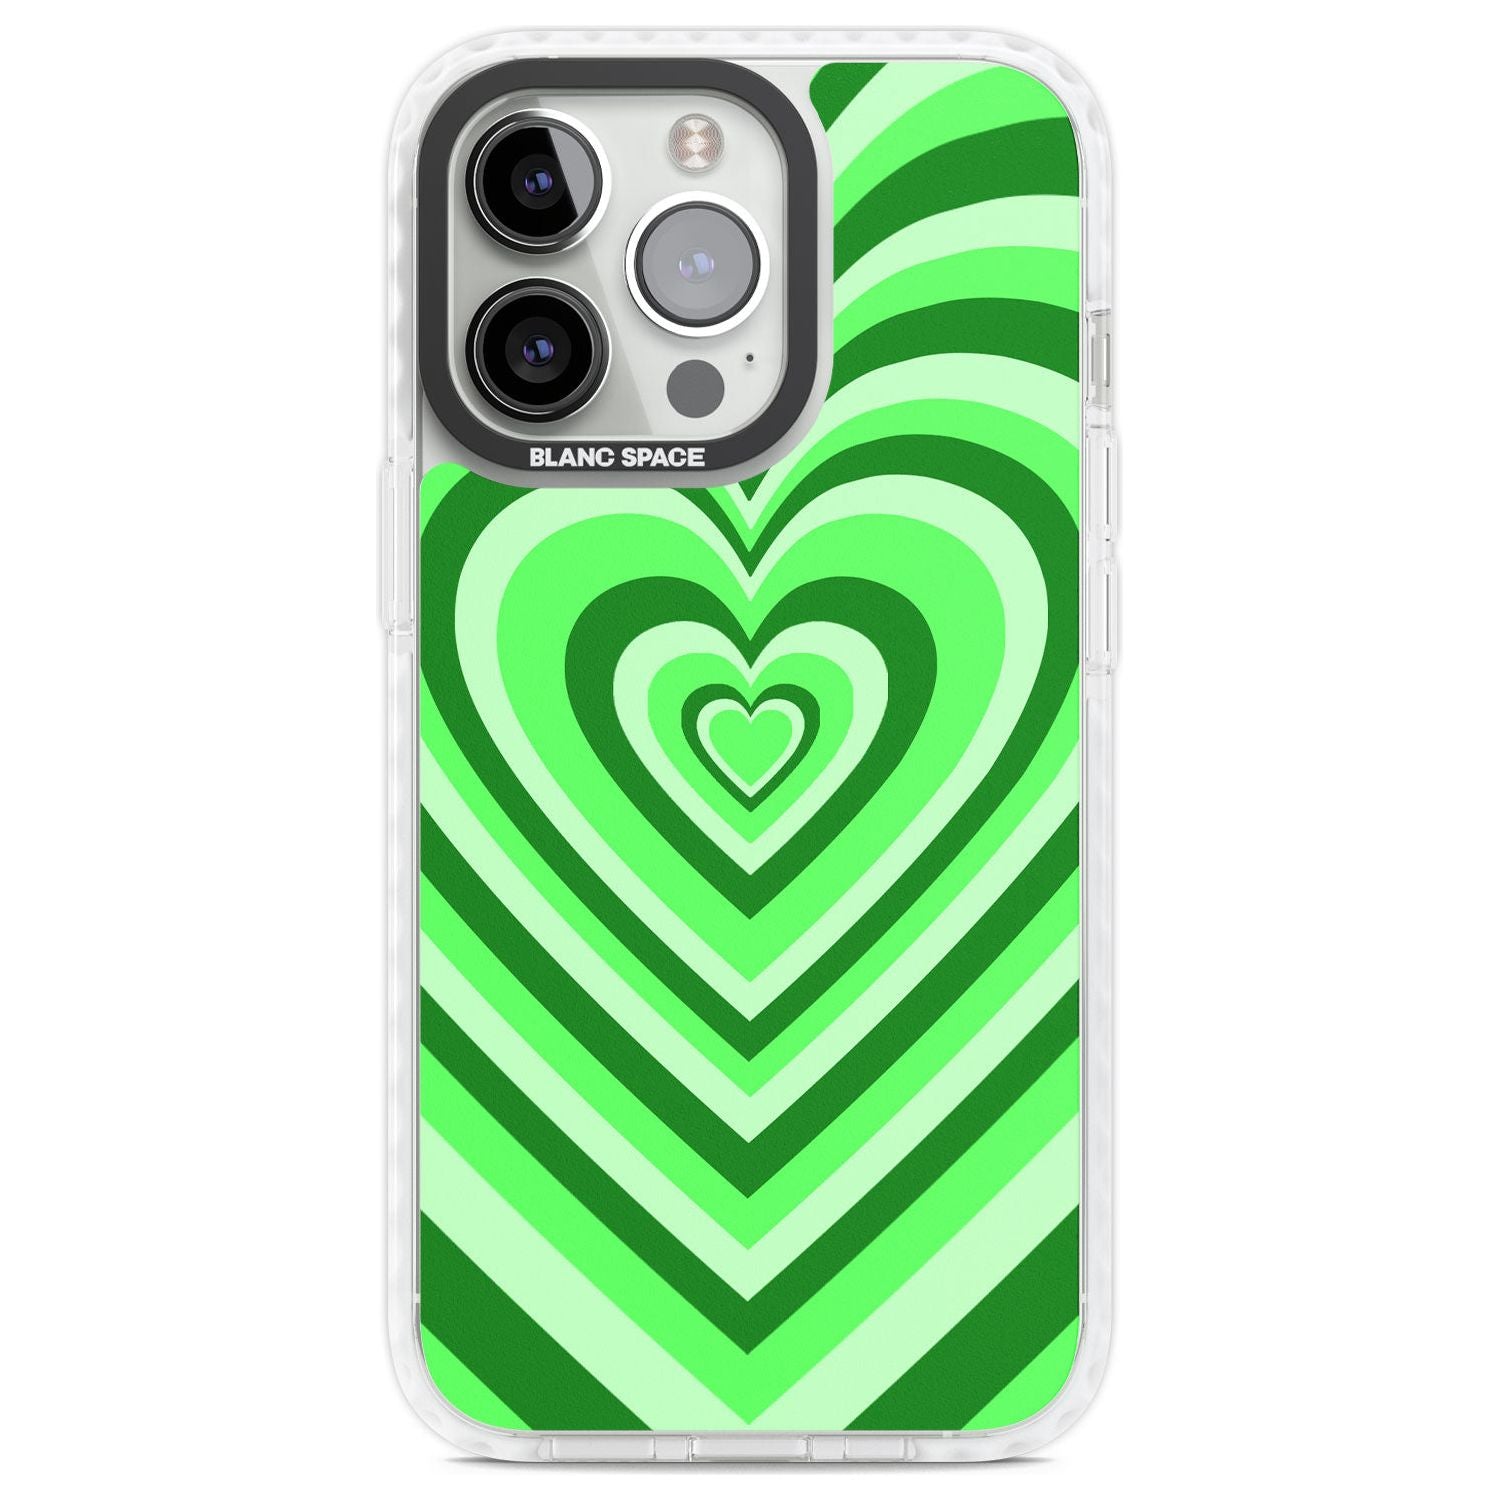 Green Heart Illusion Phone Case iPhone 13 Pro / Impact Case,iPhone 14 Pro / Impact Case,iPhone 15 Pro Max / Impact Case,iPhone 15 Pro / Impact Case Blanc Space